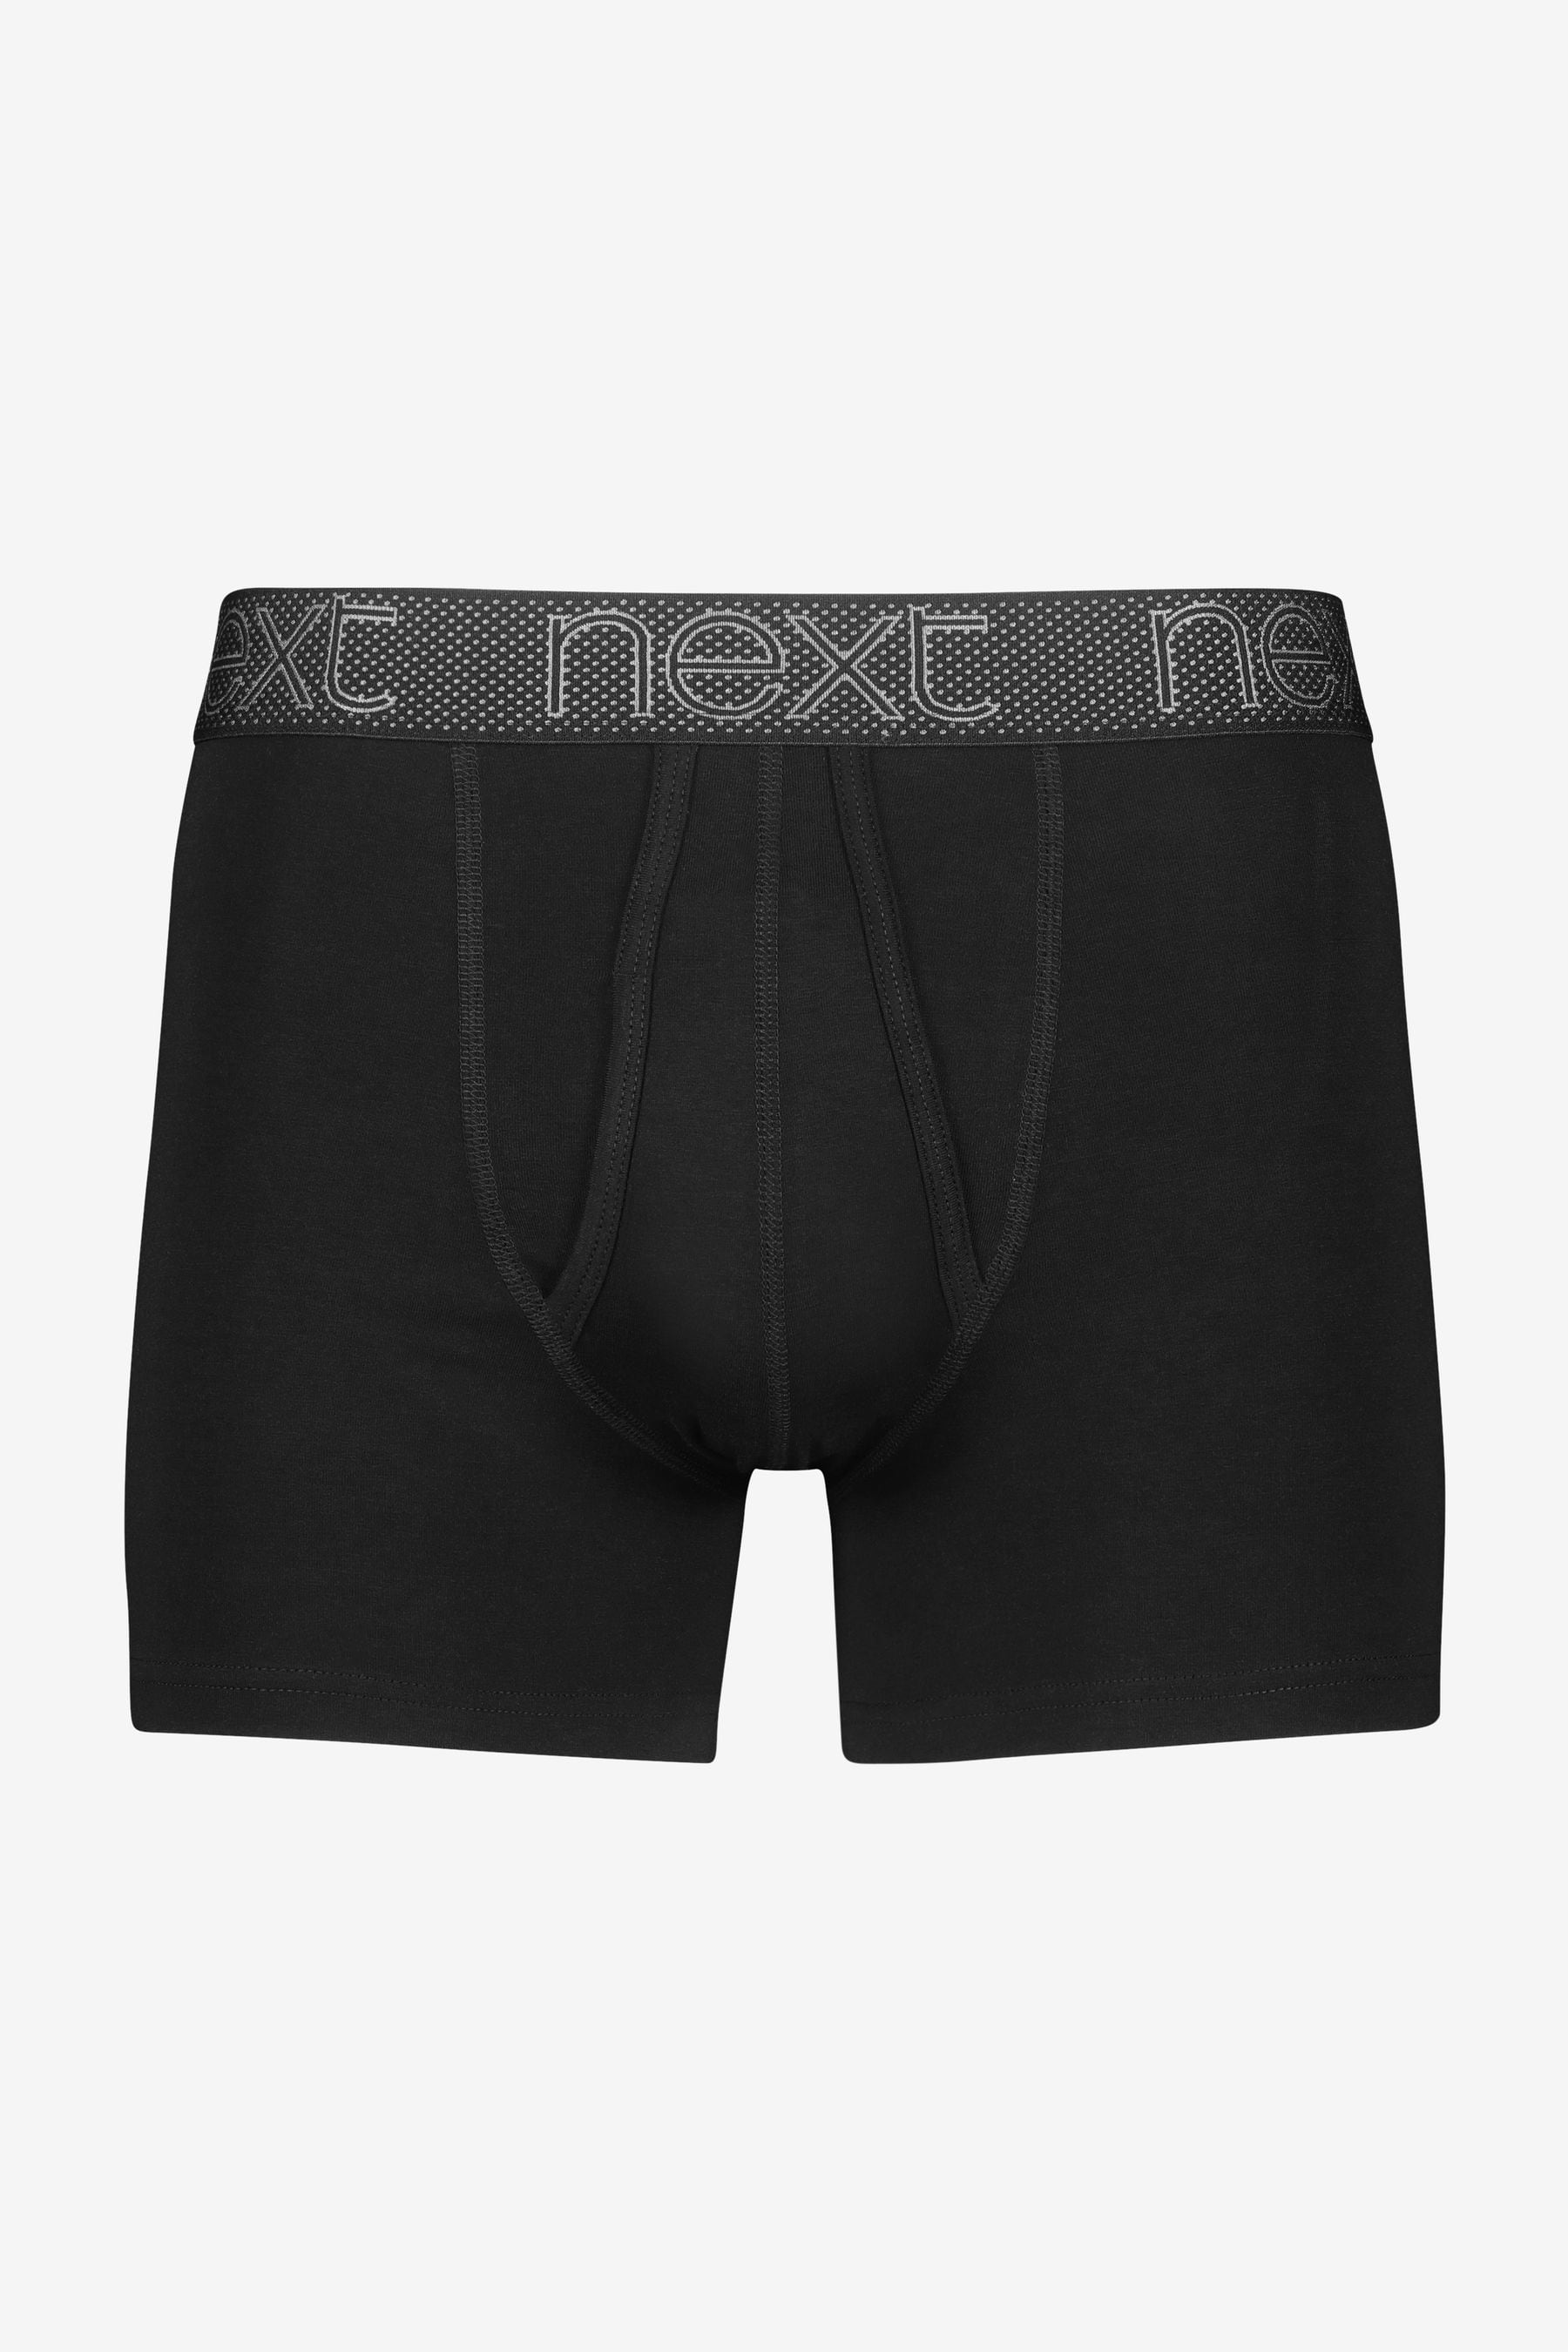 Buy Signature A-Front Boxers from Next Australia